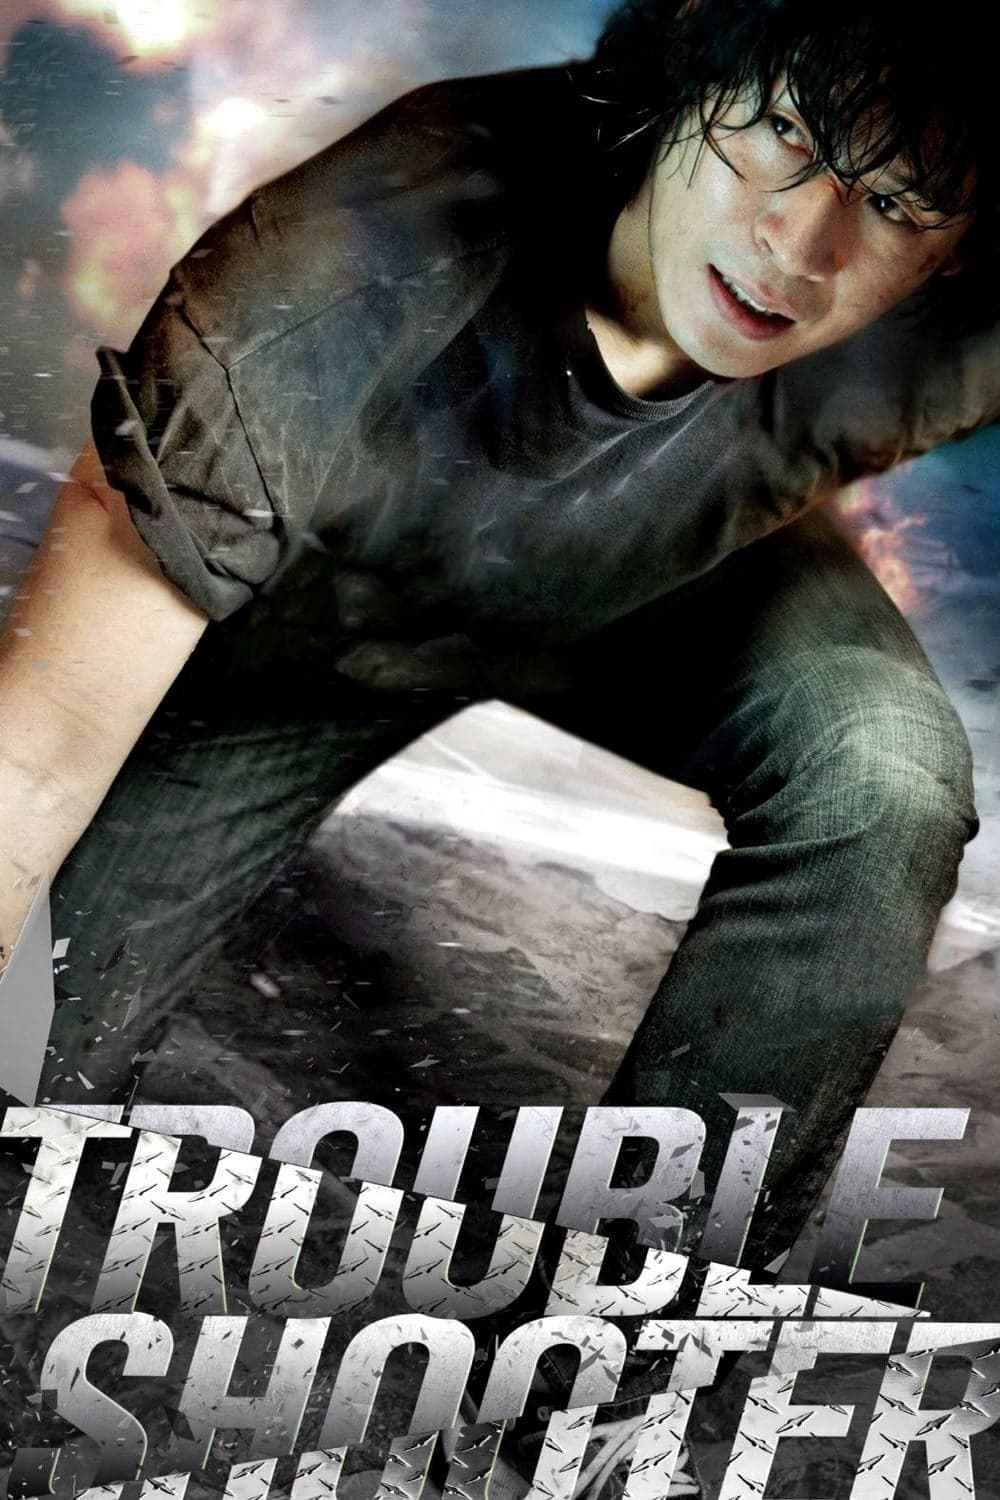 Troubleshooter (2010)